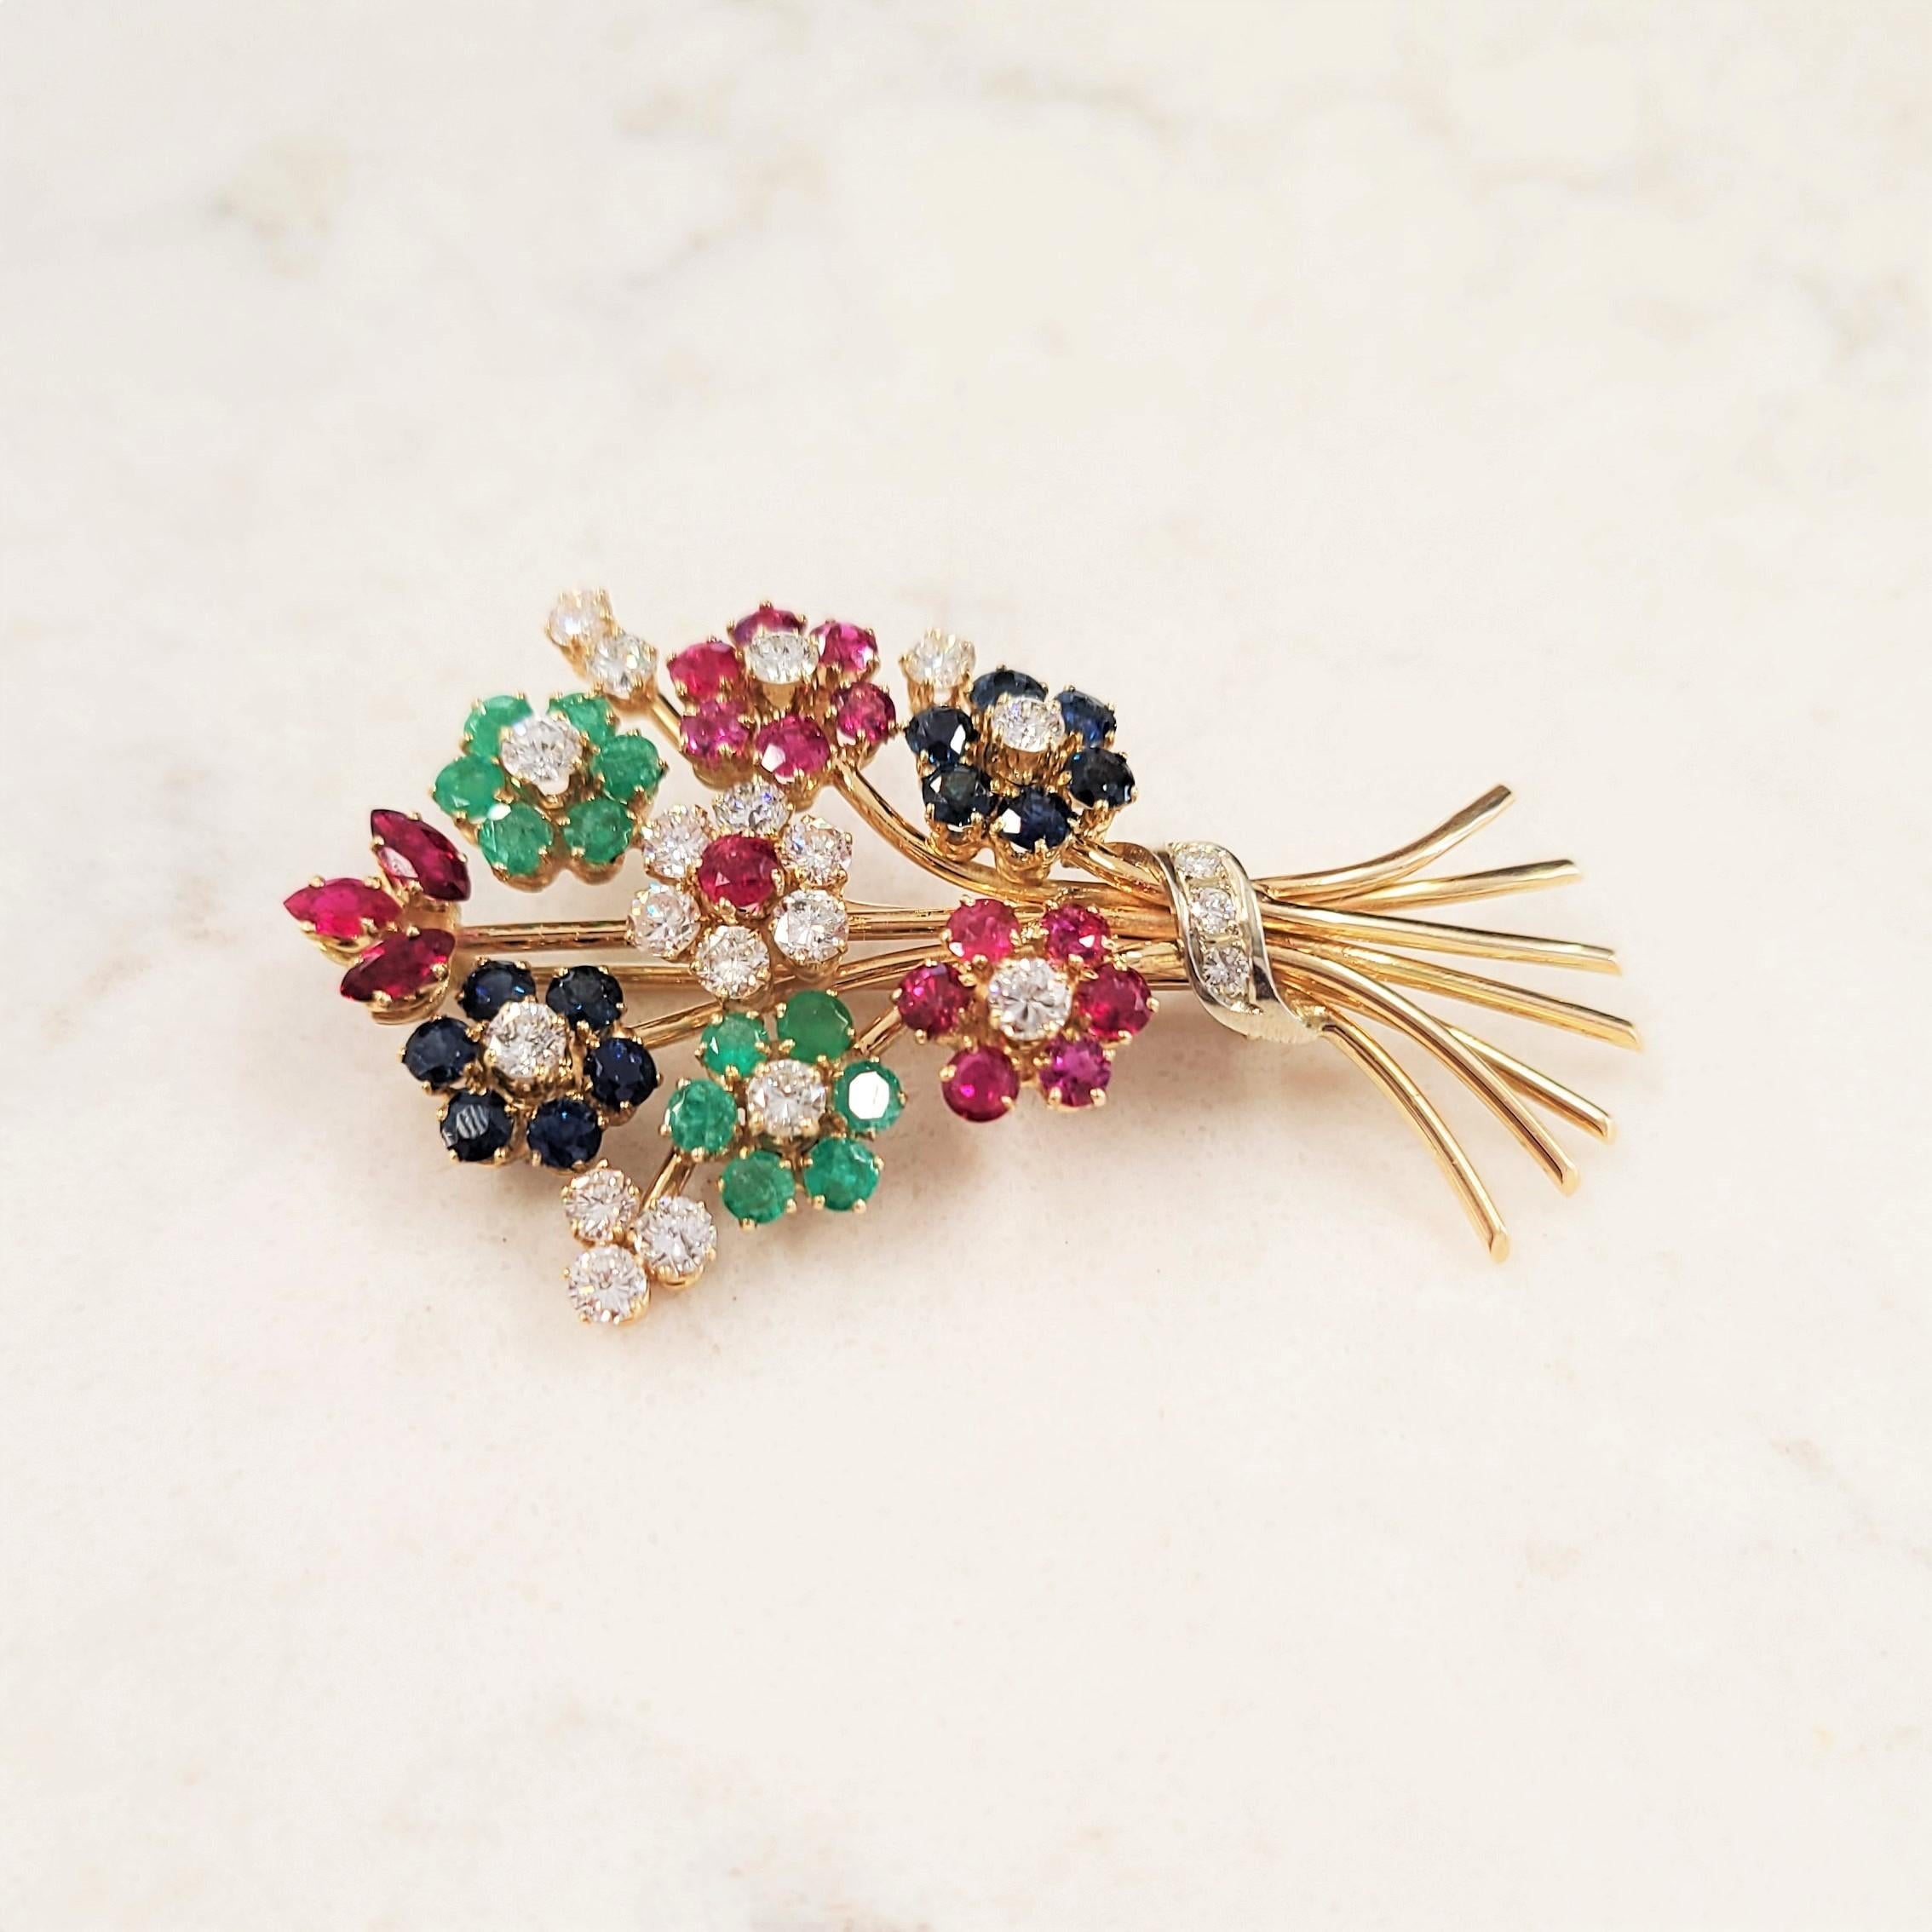 This precious gemstone bouquet showcases a bonanza of color and luxury! This brightly polished 14k white gold bouquet features rubies, diamonds, sapphires, and emeralds mixed into bunches of flowers and leaves in a vibrant cascade of brilliance and